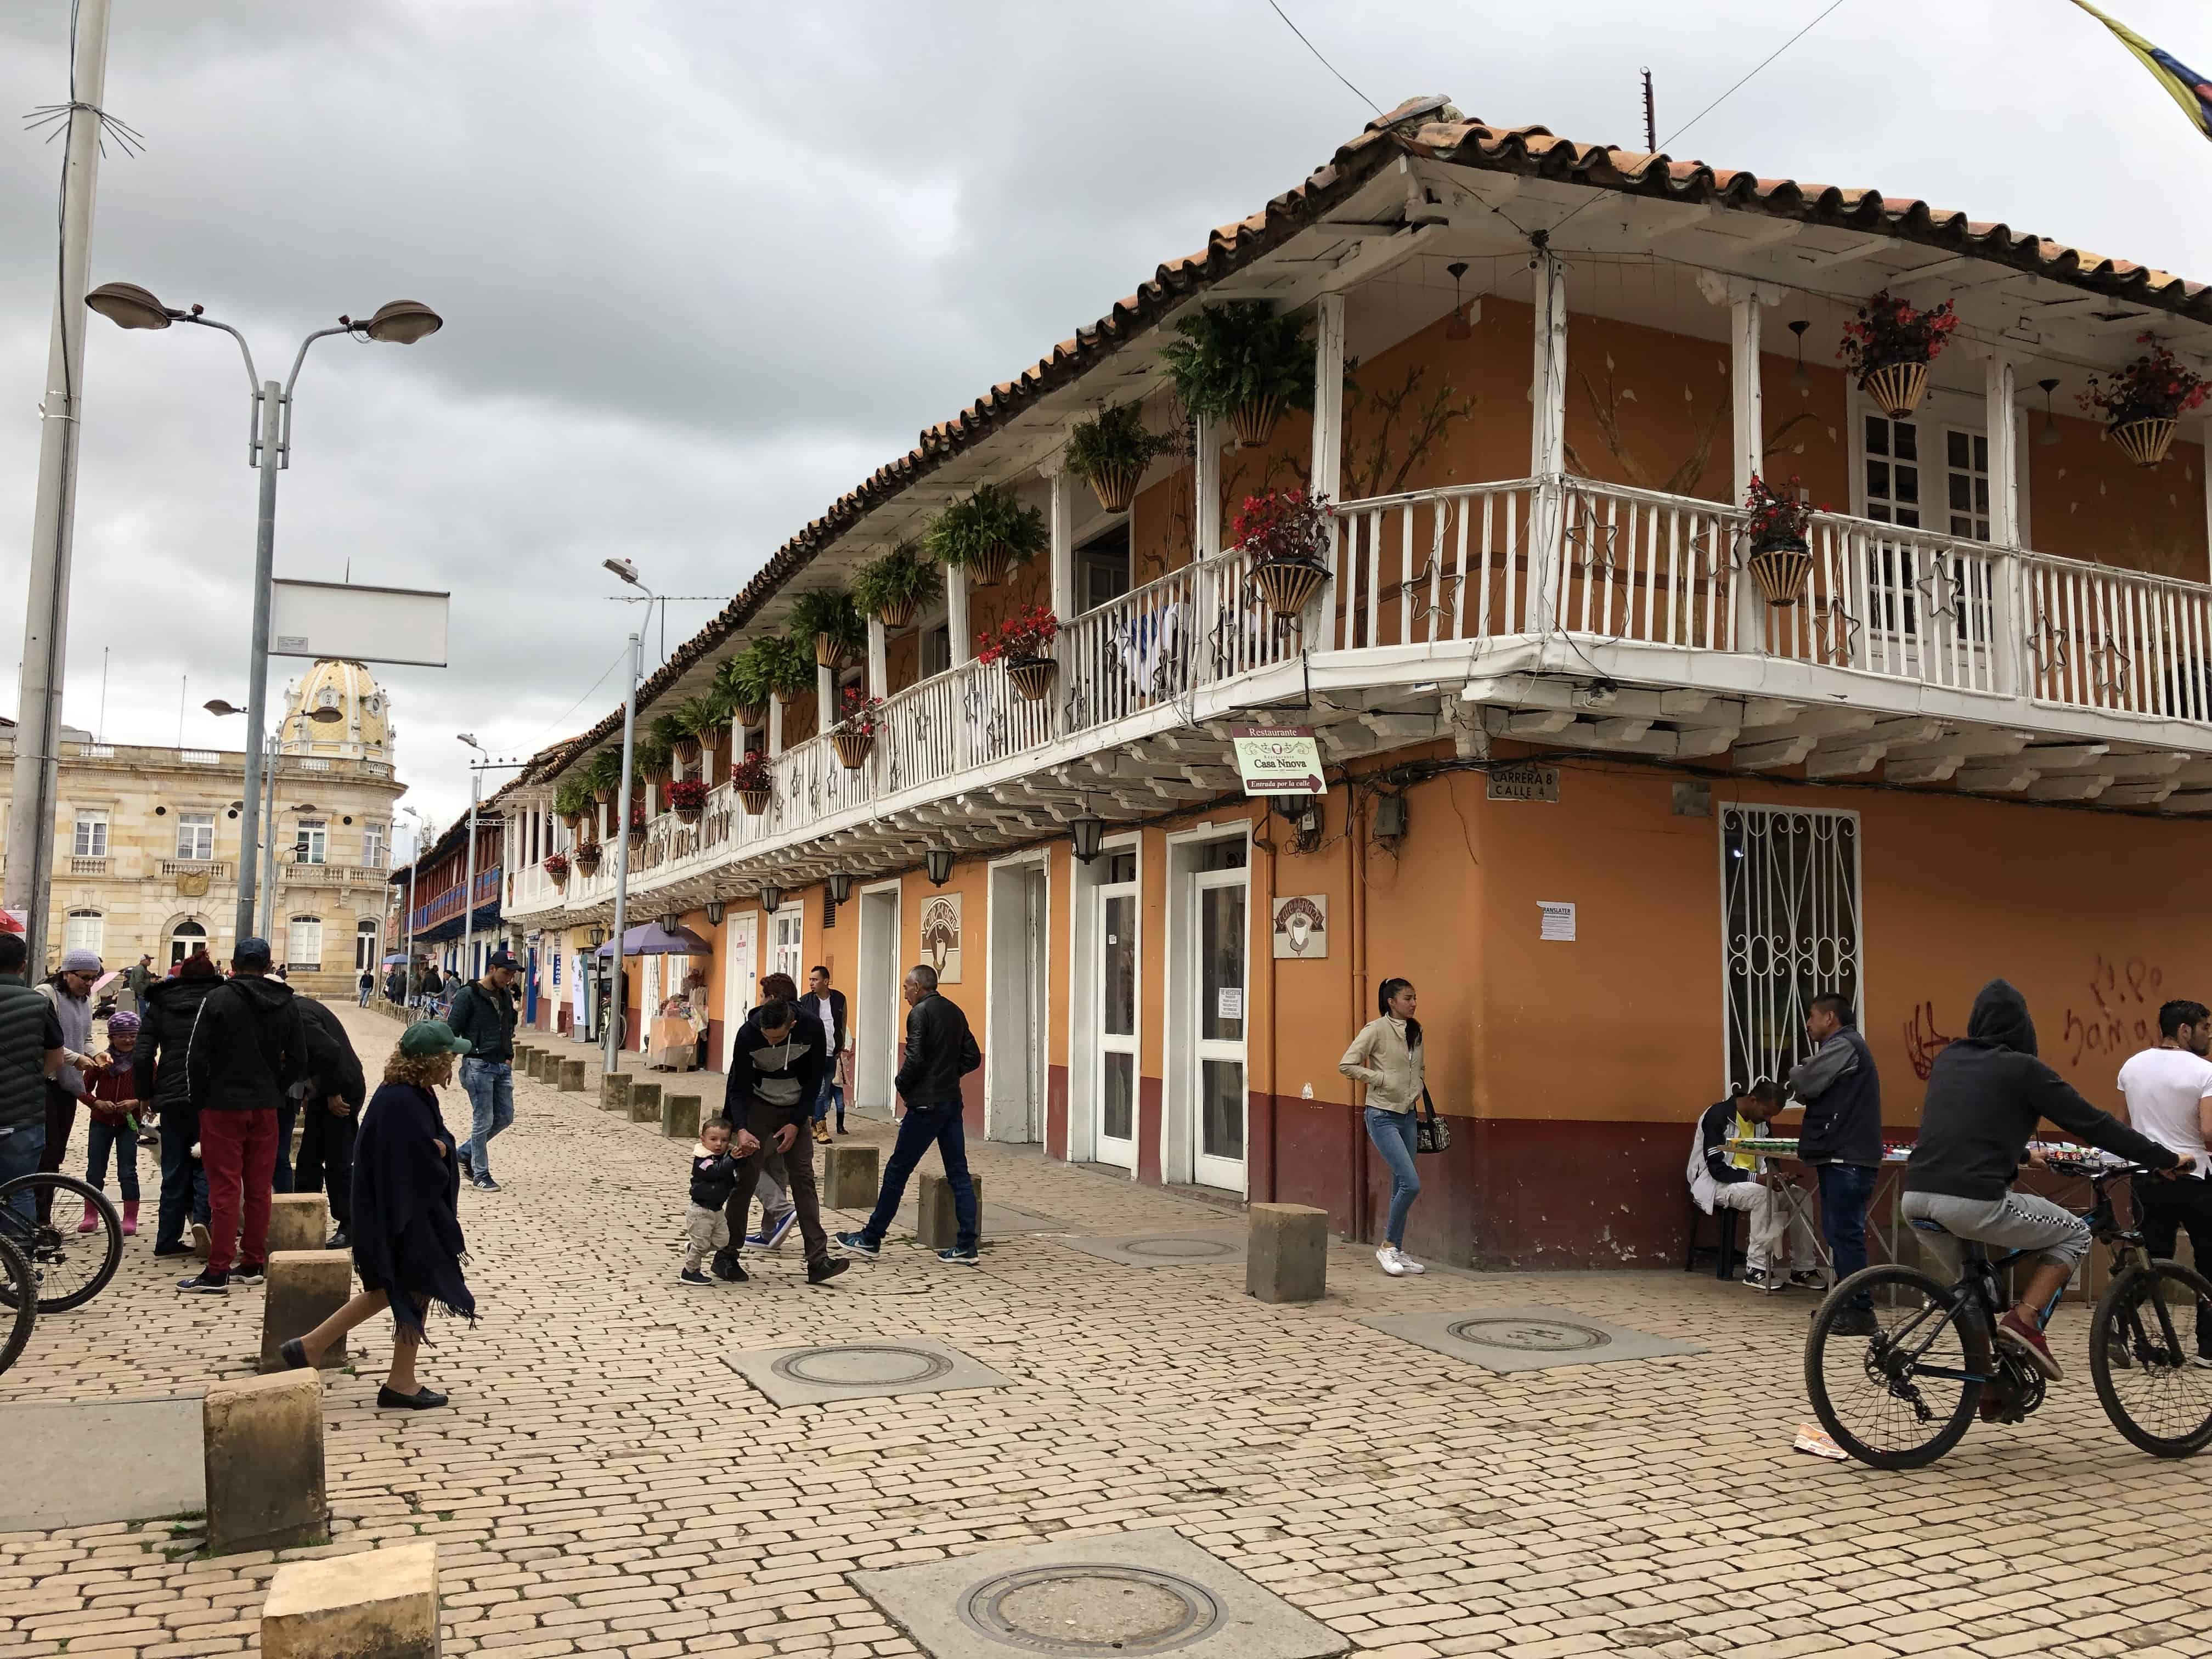 Colonial buildings on the main plaza in Zipaquirá, Cundinamarca, Colombia